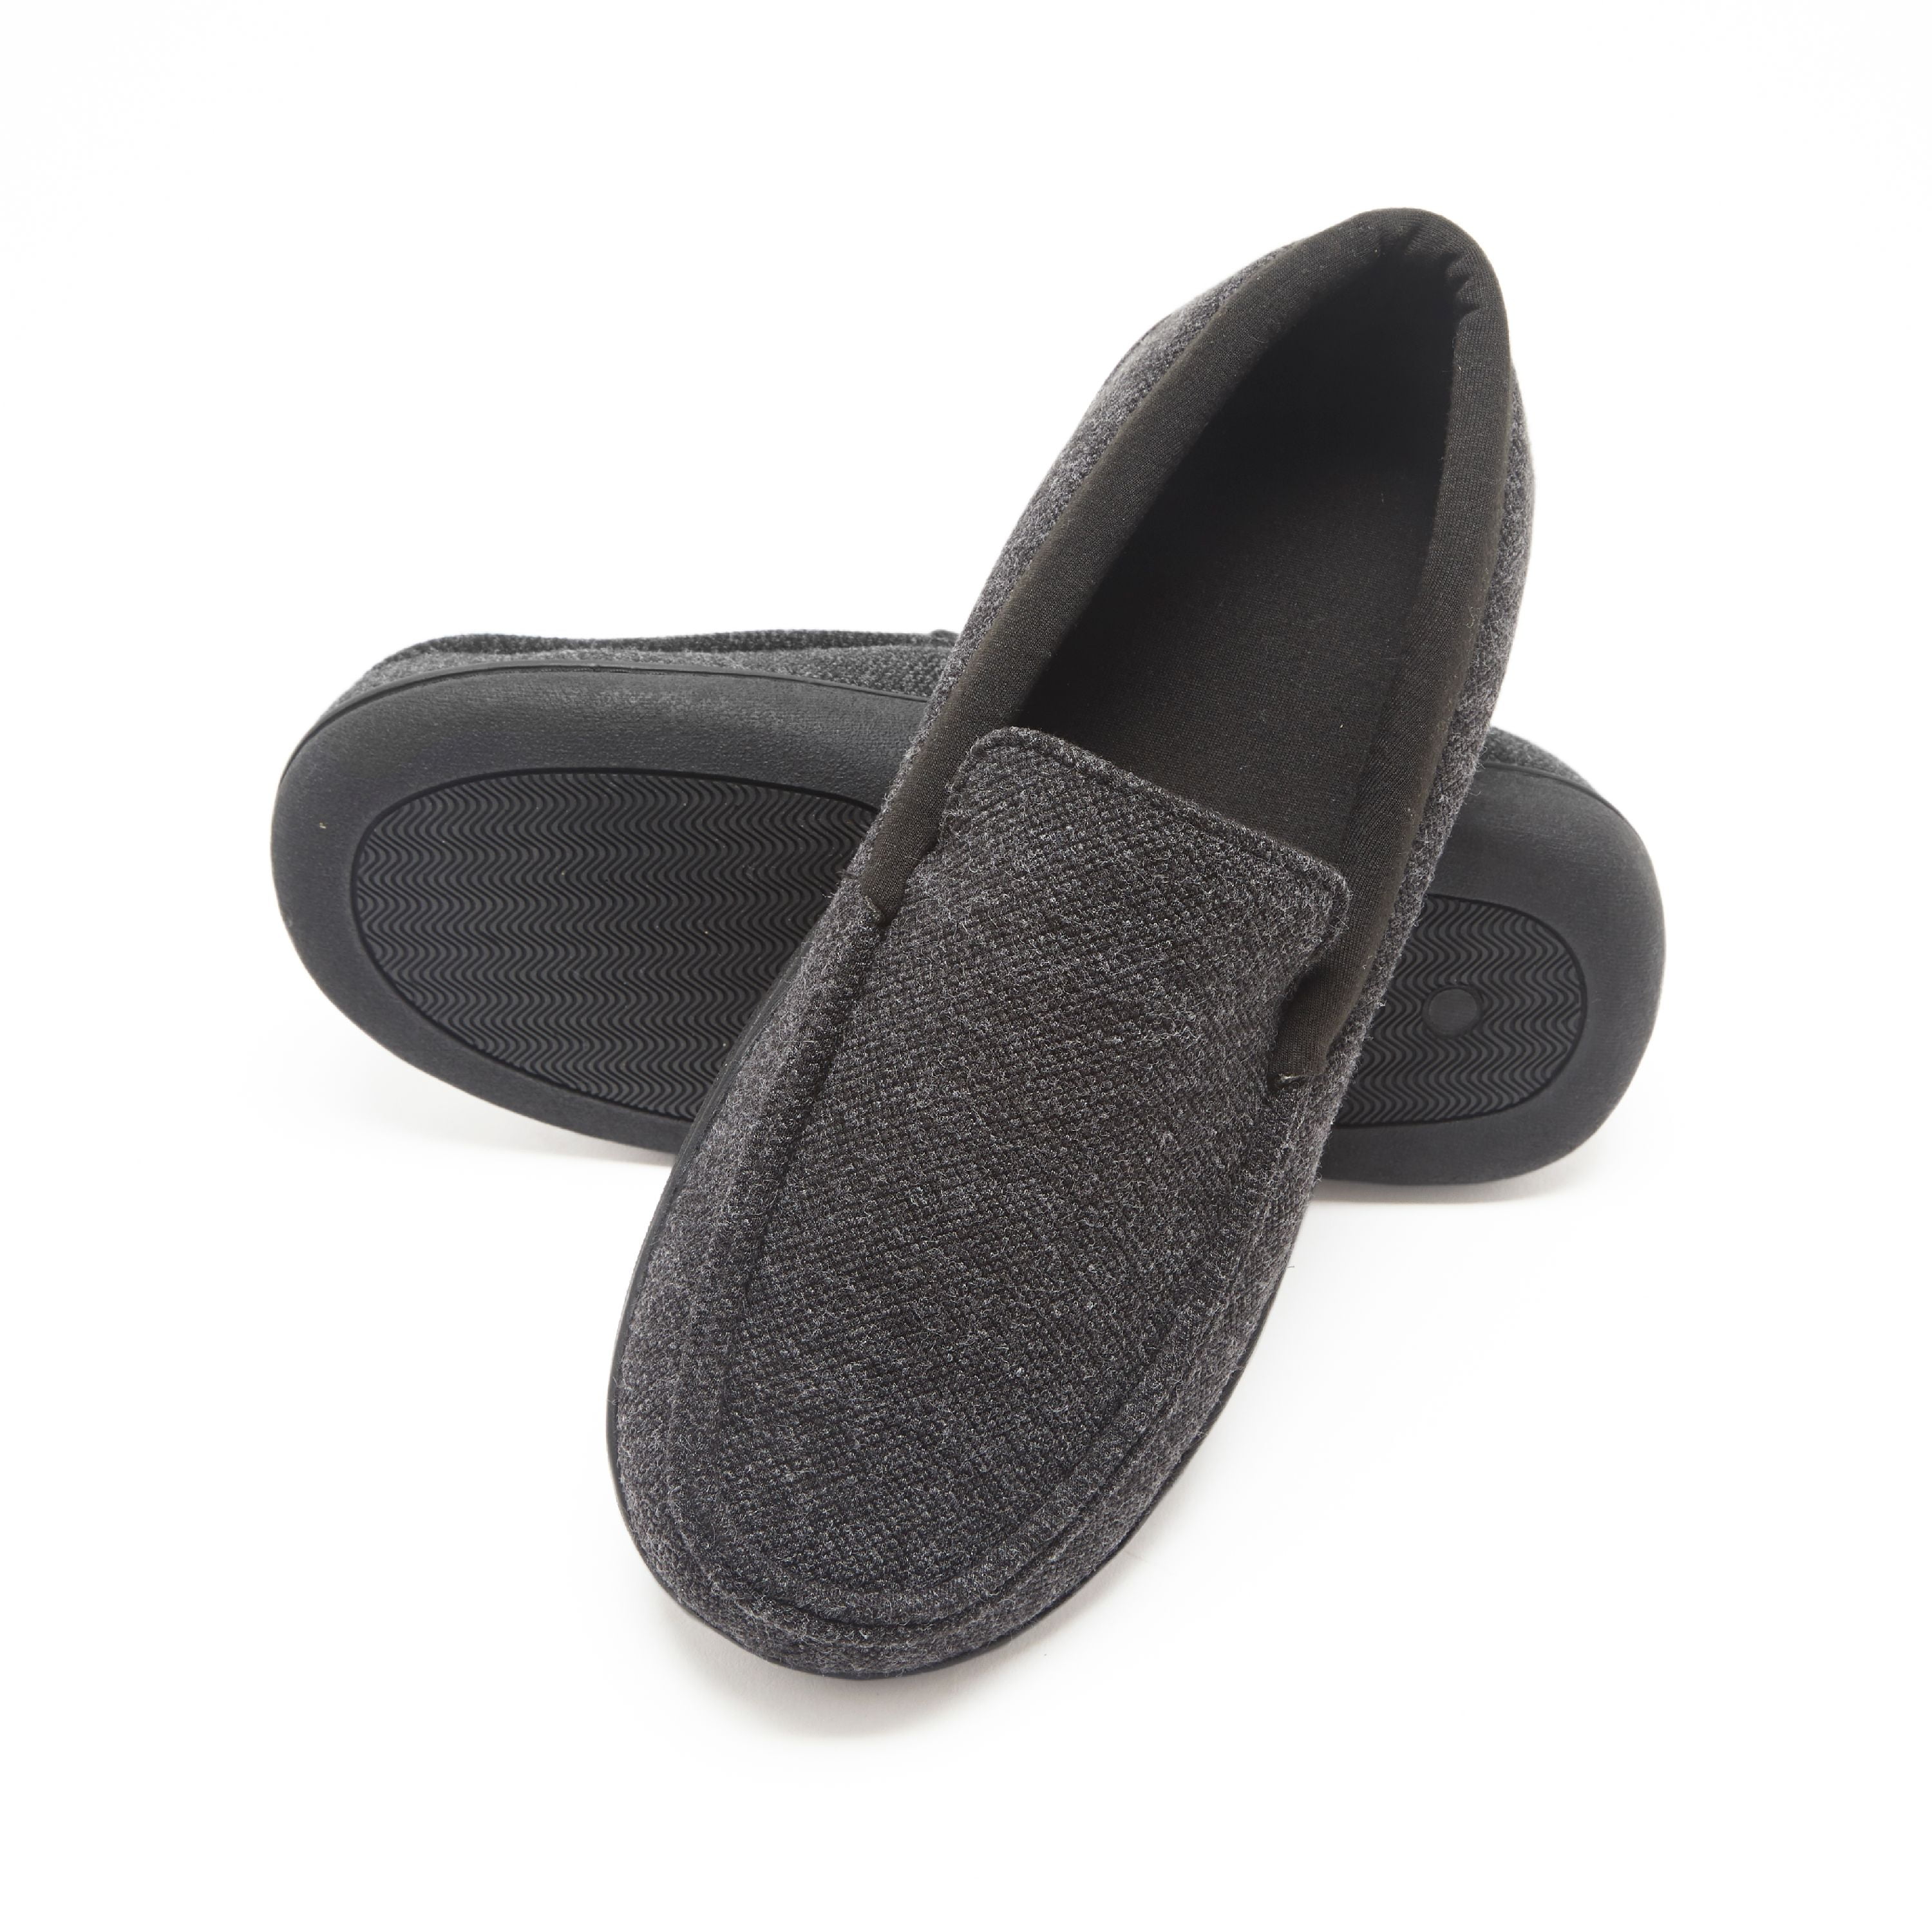 Hanes Men's Slippers House Shoes 